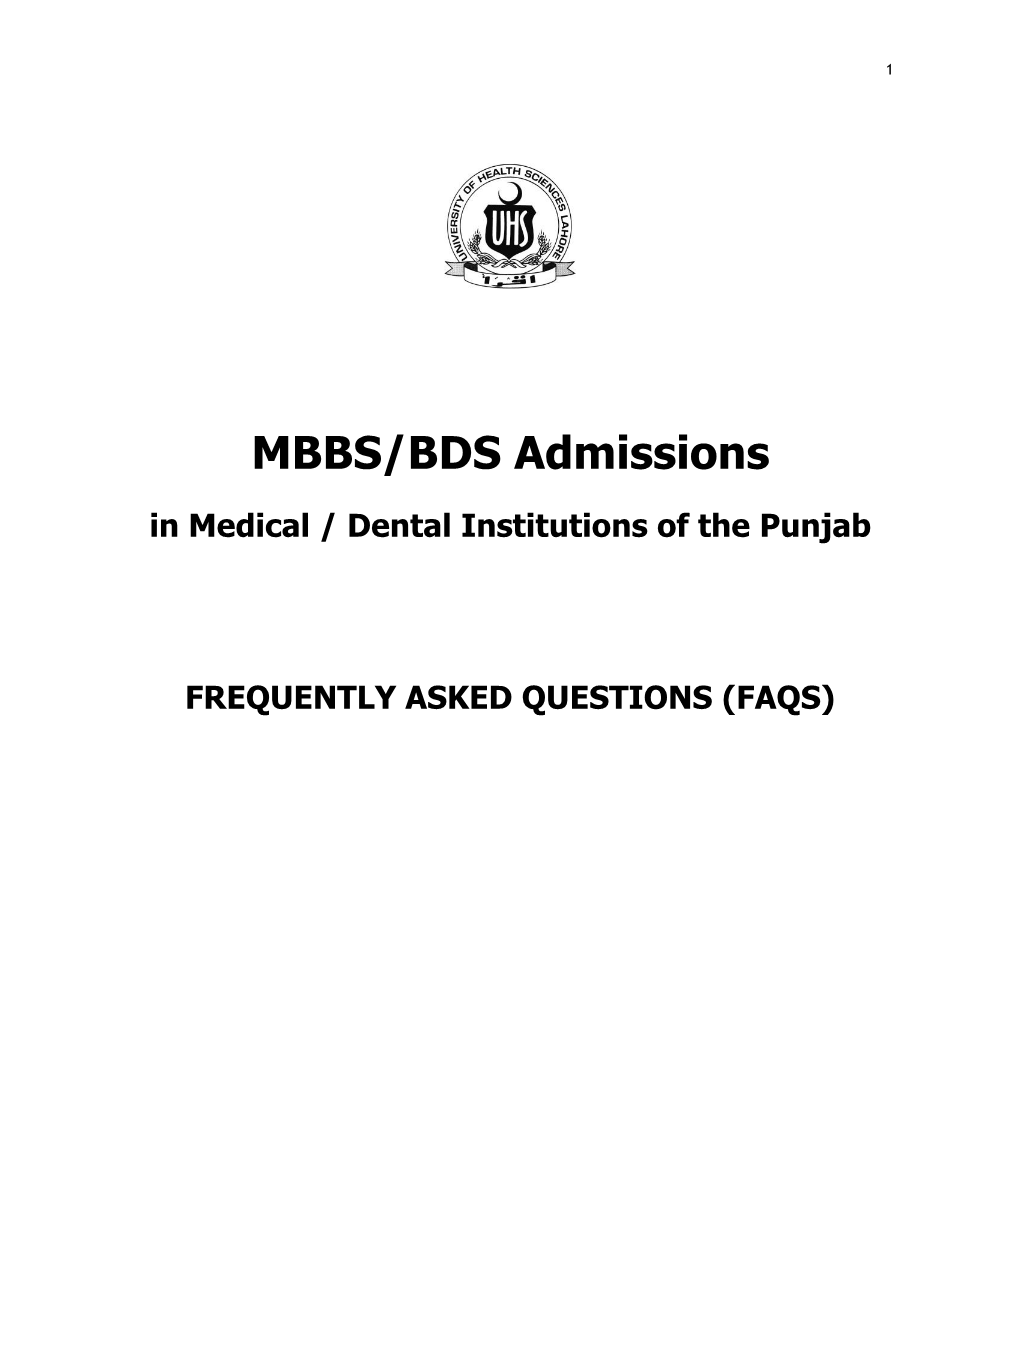 MBBS/BDS Admissions in Medical / Dental Institutions of the Punjab